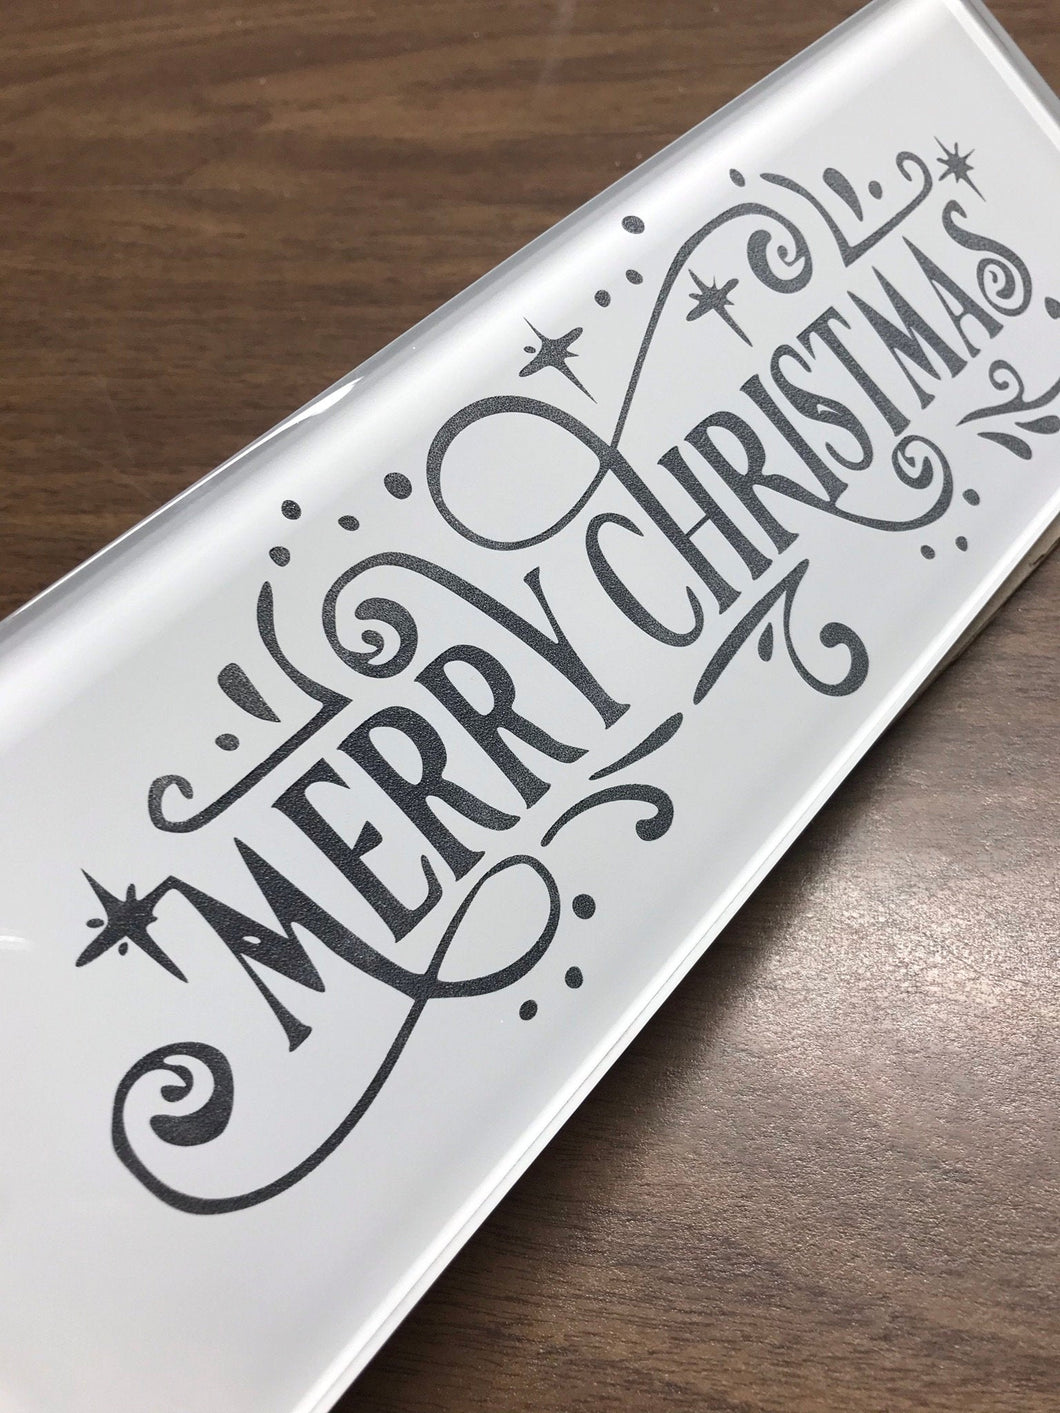 Stunning Reverse ENGRAVED Merry Christmas Glass Tile ~ Beautiful Gift